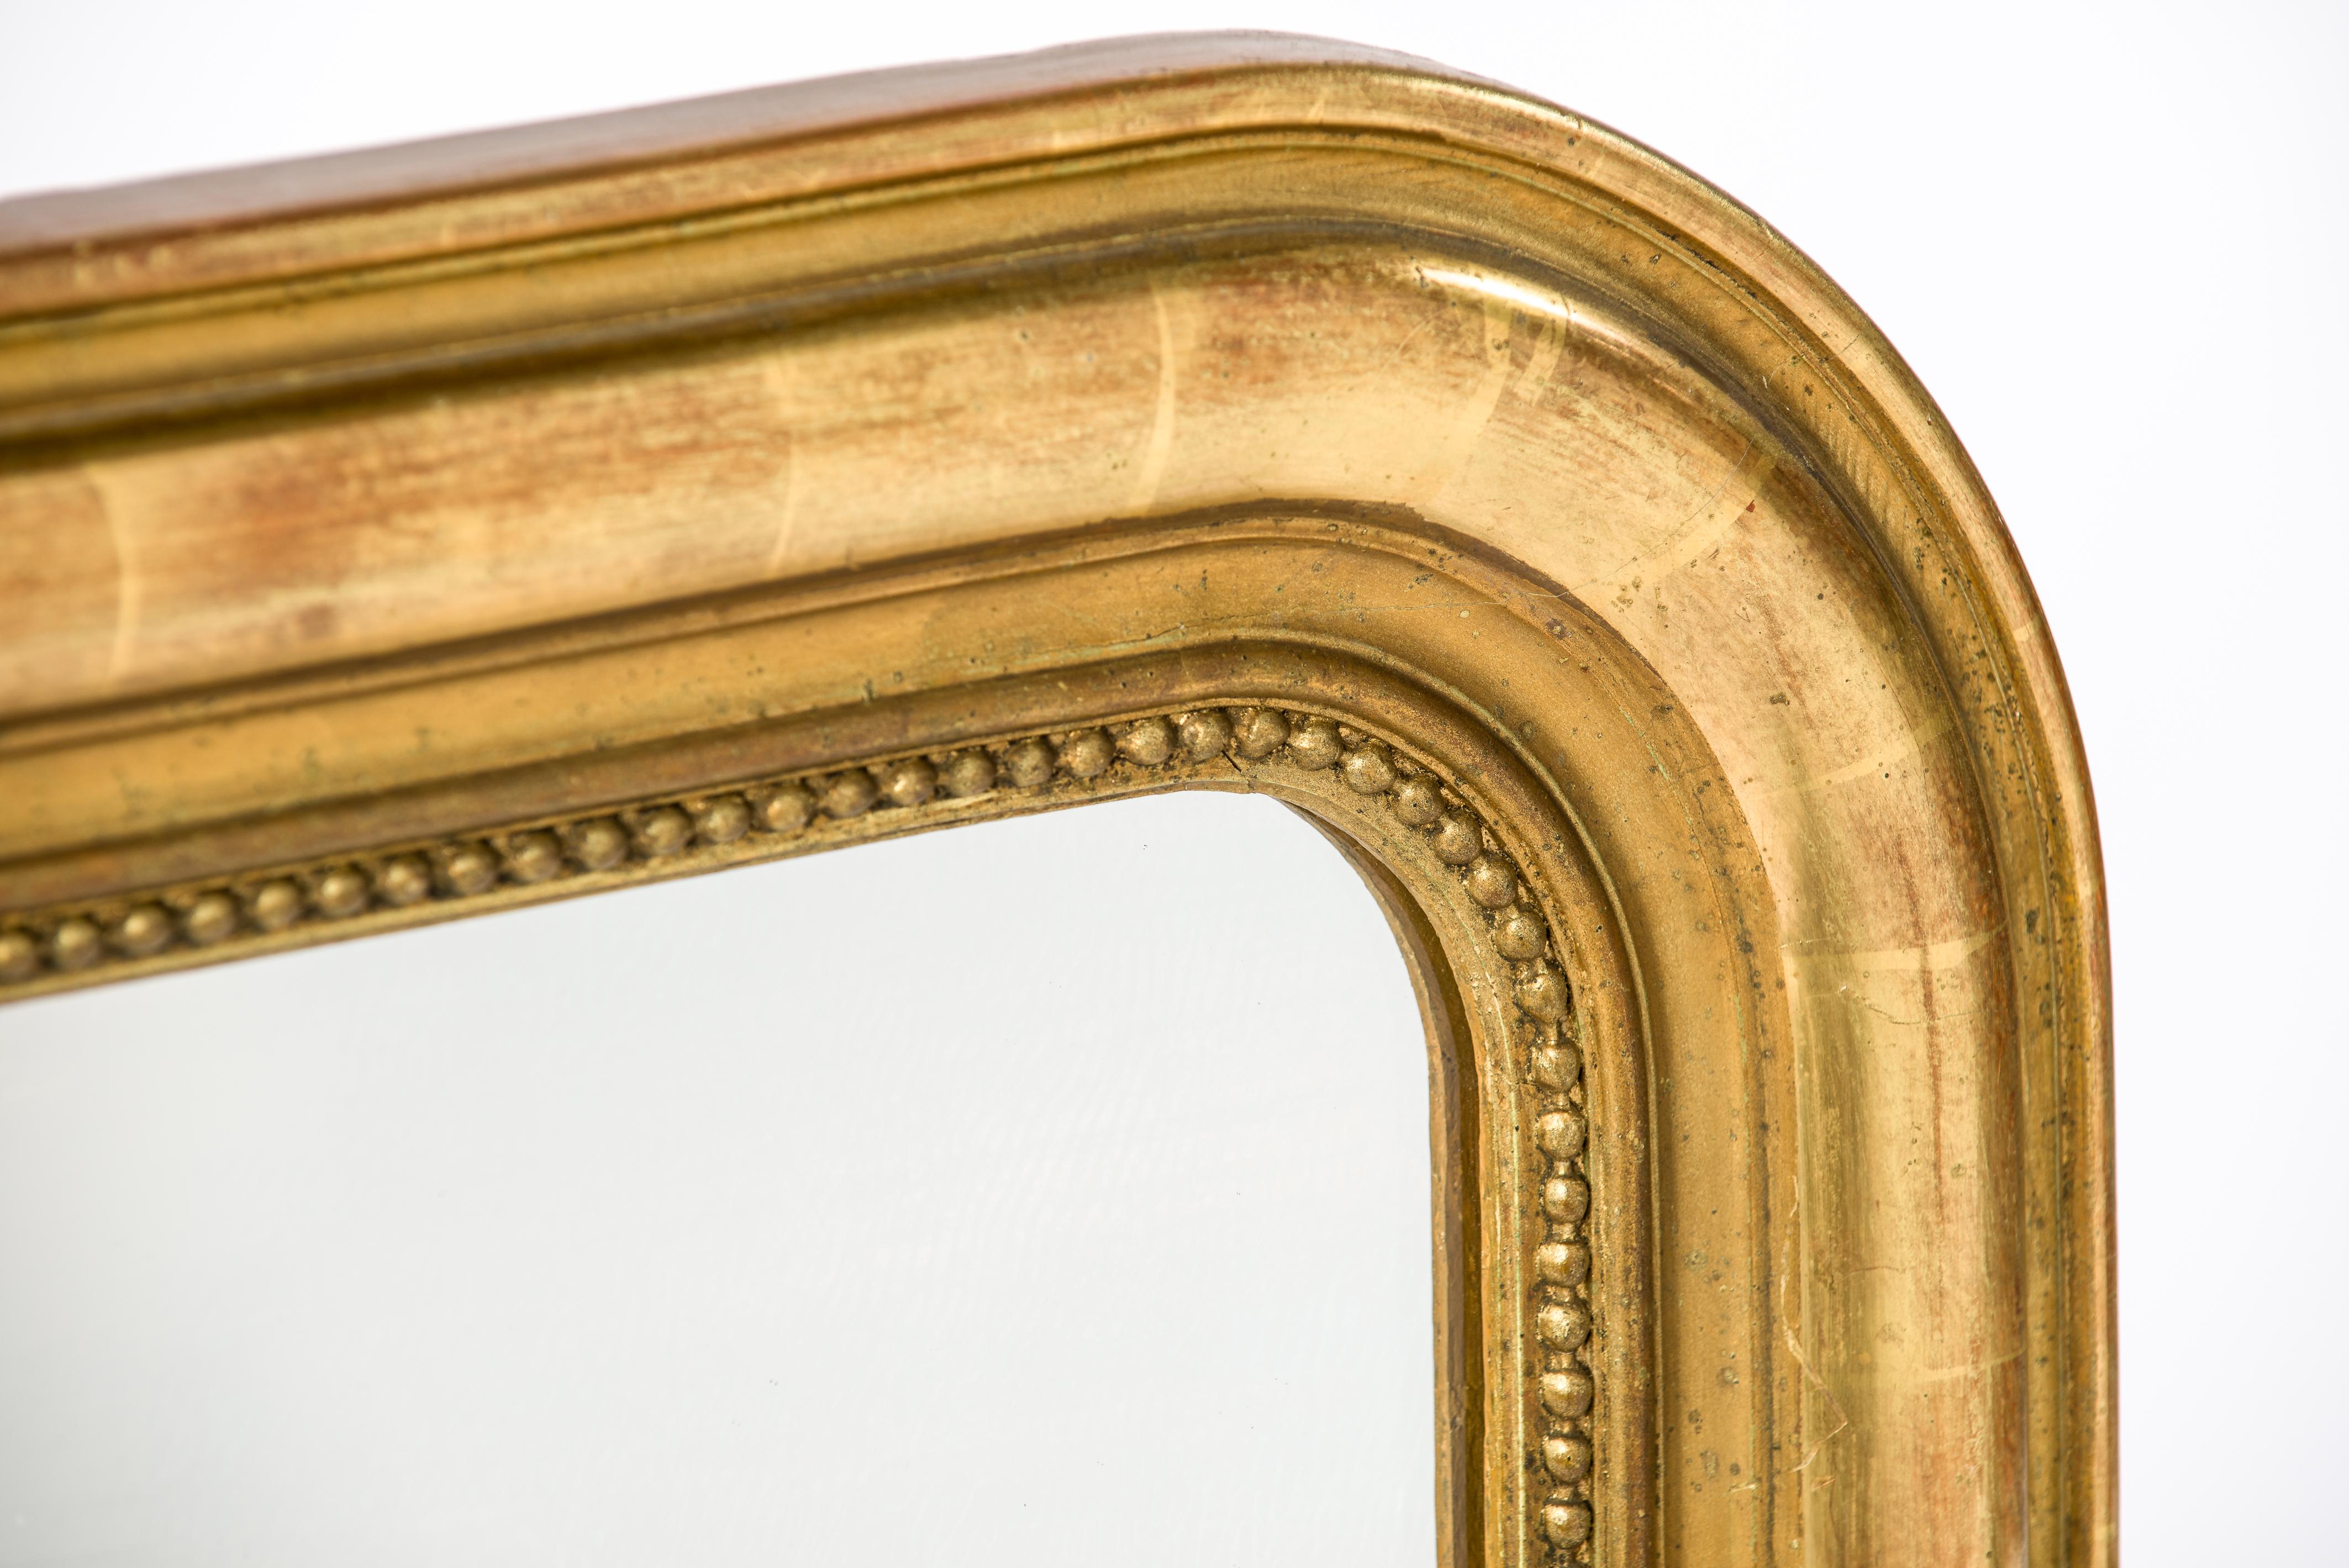 This beautiful antique mirror was made in France in the late 19th century, circa 1890. It features the upper rounded corners typical for the Louis Philippe style. The mirror has a solid pine frame that was smoothened with gesso. A classic pearl